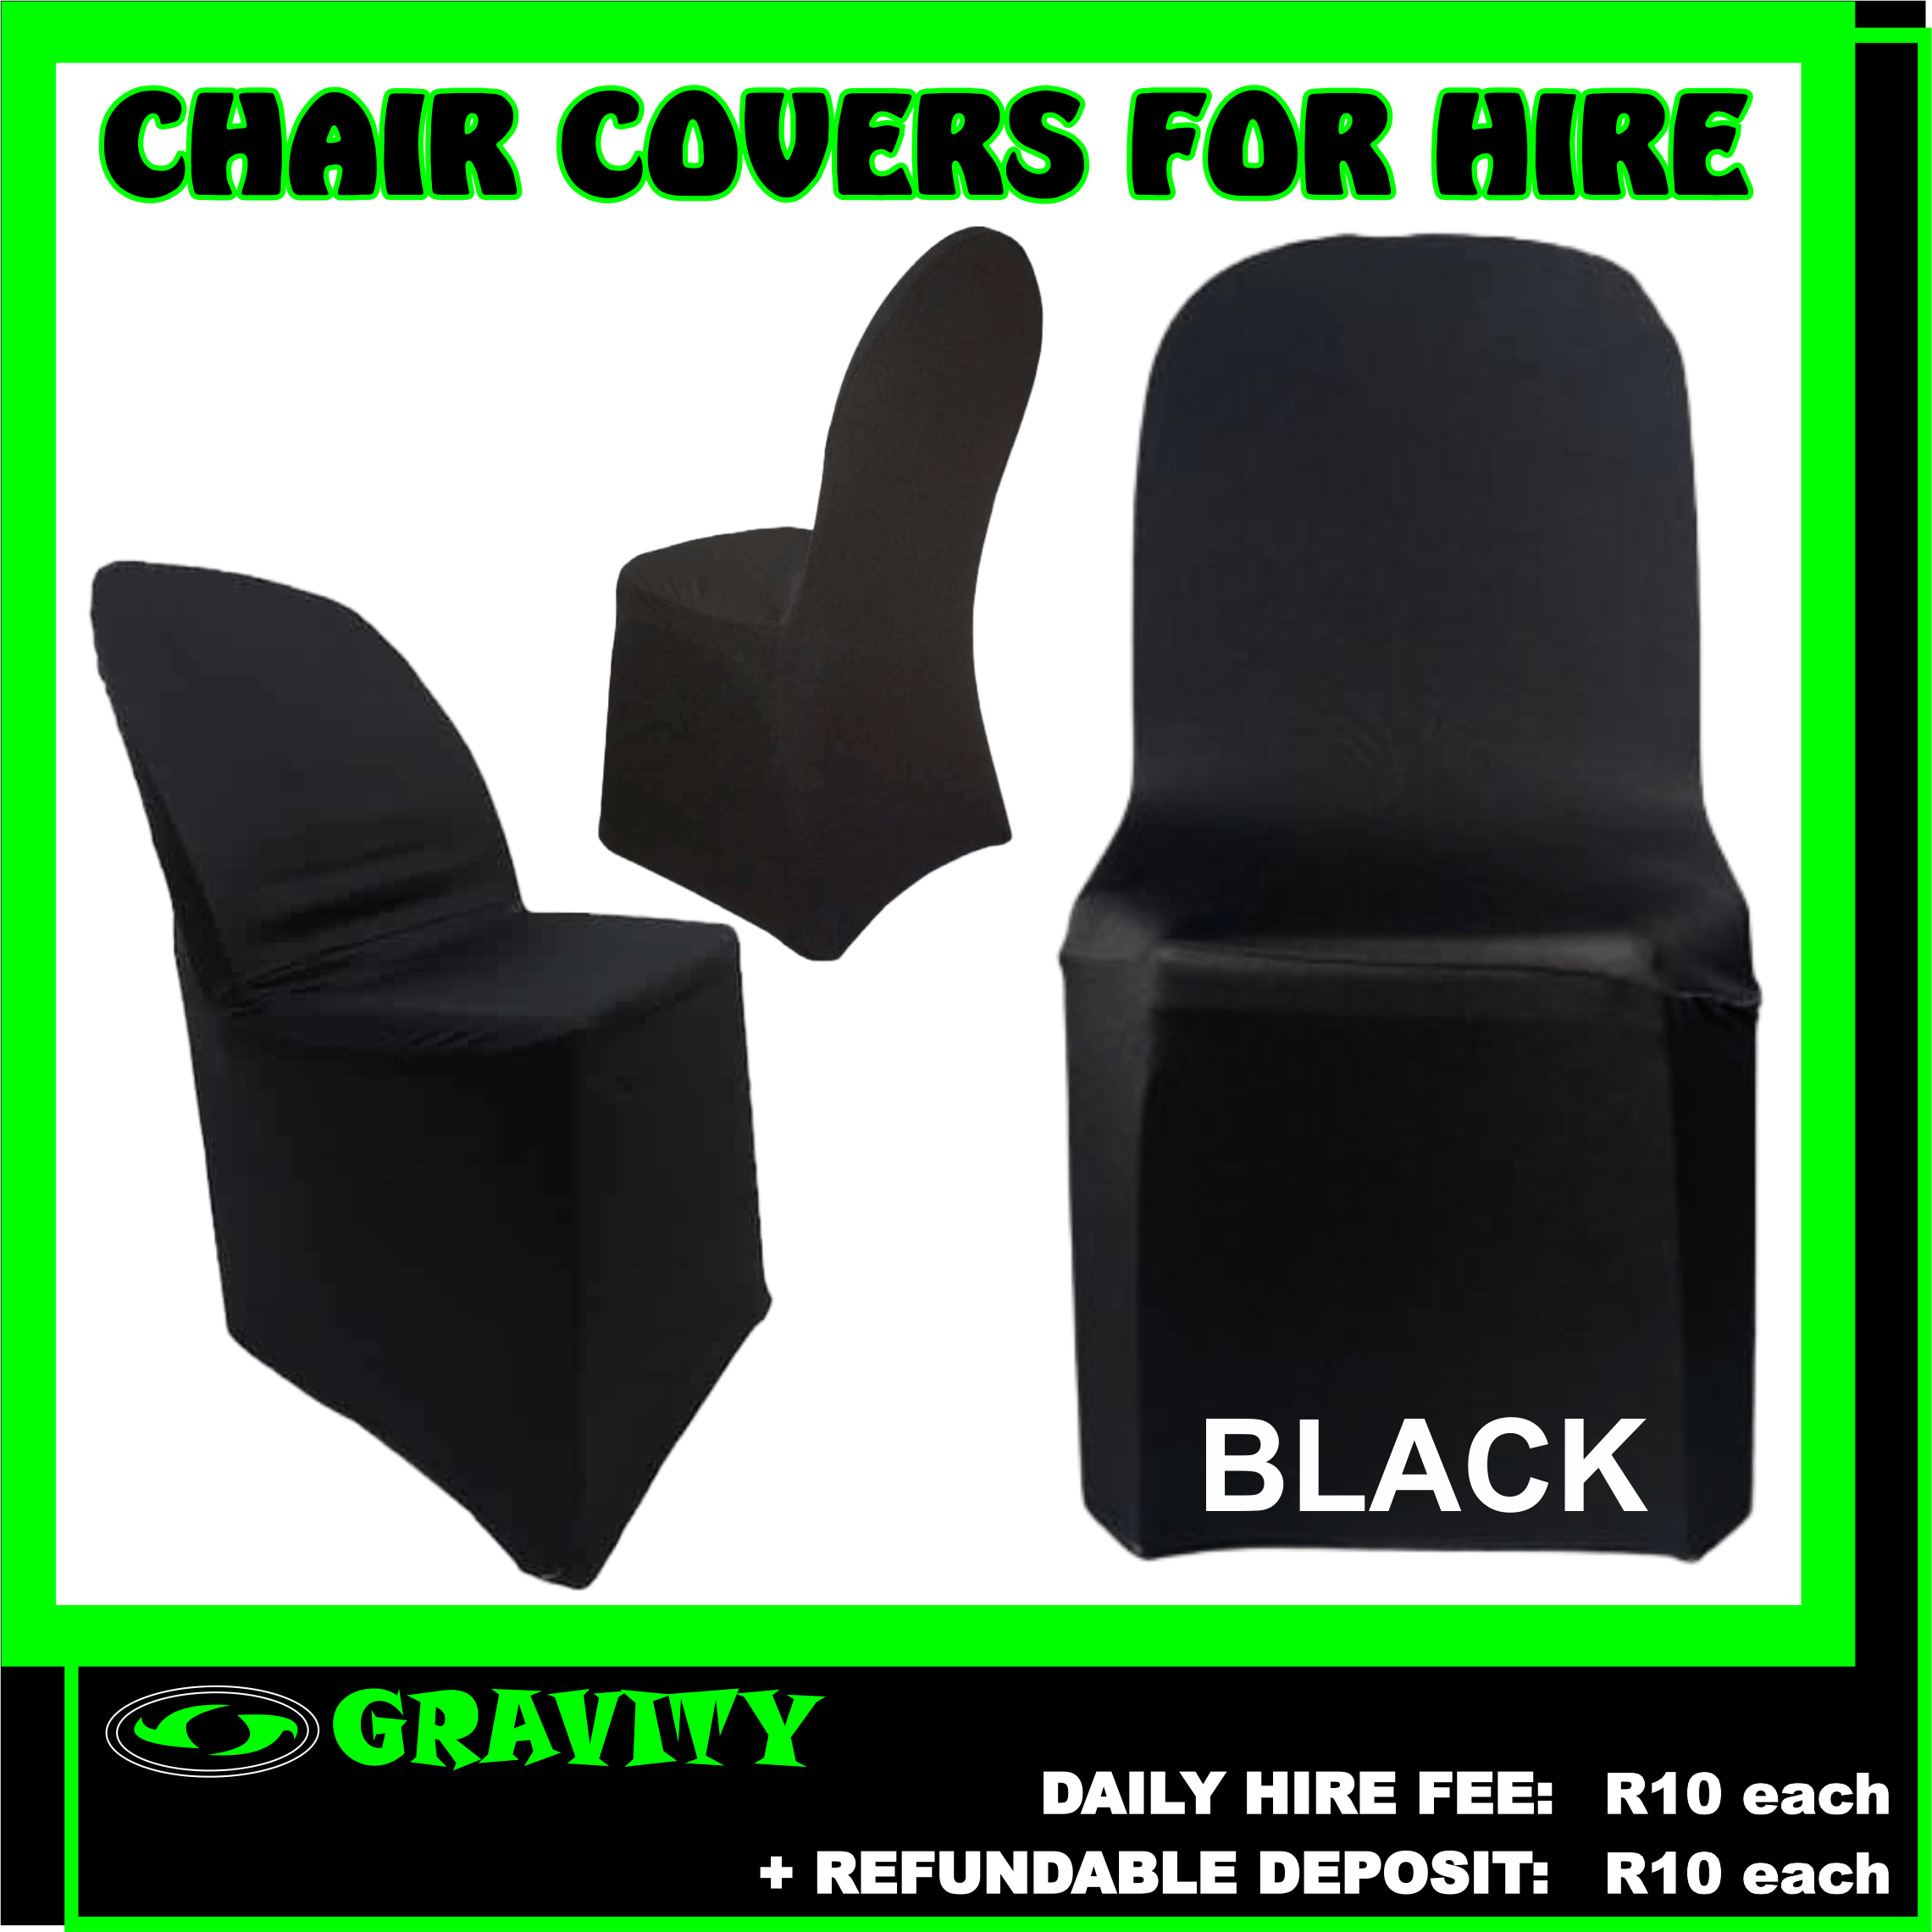 DIY CHAIR COVERS FOR HIRE DURBAN KZN  Chair Covers and Accessories. White Stretch Ancona Chair Cover. CHAIR COVER (BLACK)  Black Conference Chair Covers Hire stretch chair covers for conference chairs at affordable rates from Sheer Magic| Chair covers/Chair bows | 